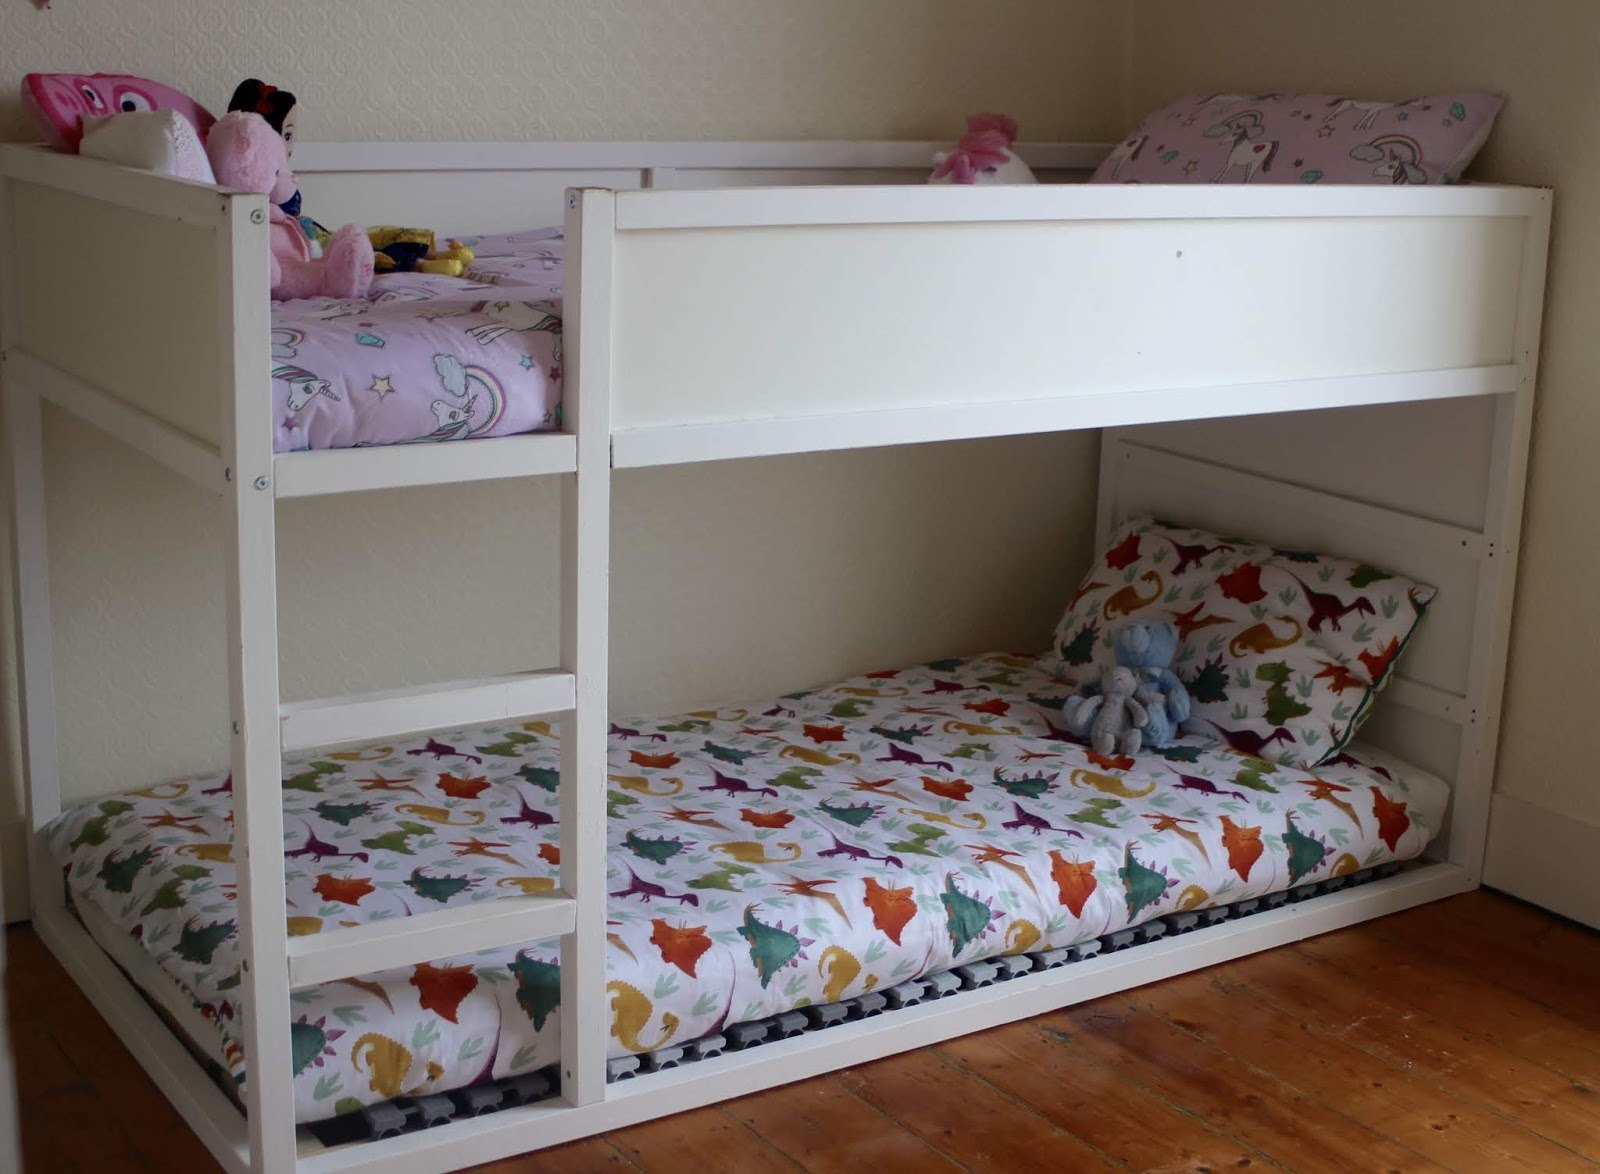 Fascinating ikea kura bed hack Simple Ikea Kura Bunk Bed Hack The Perfect Beds For Under 5s Emily And Indiana